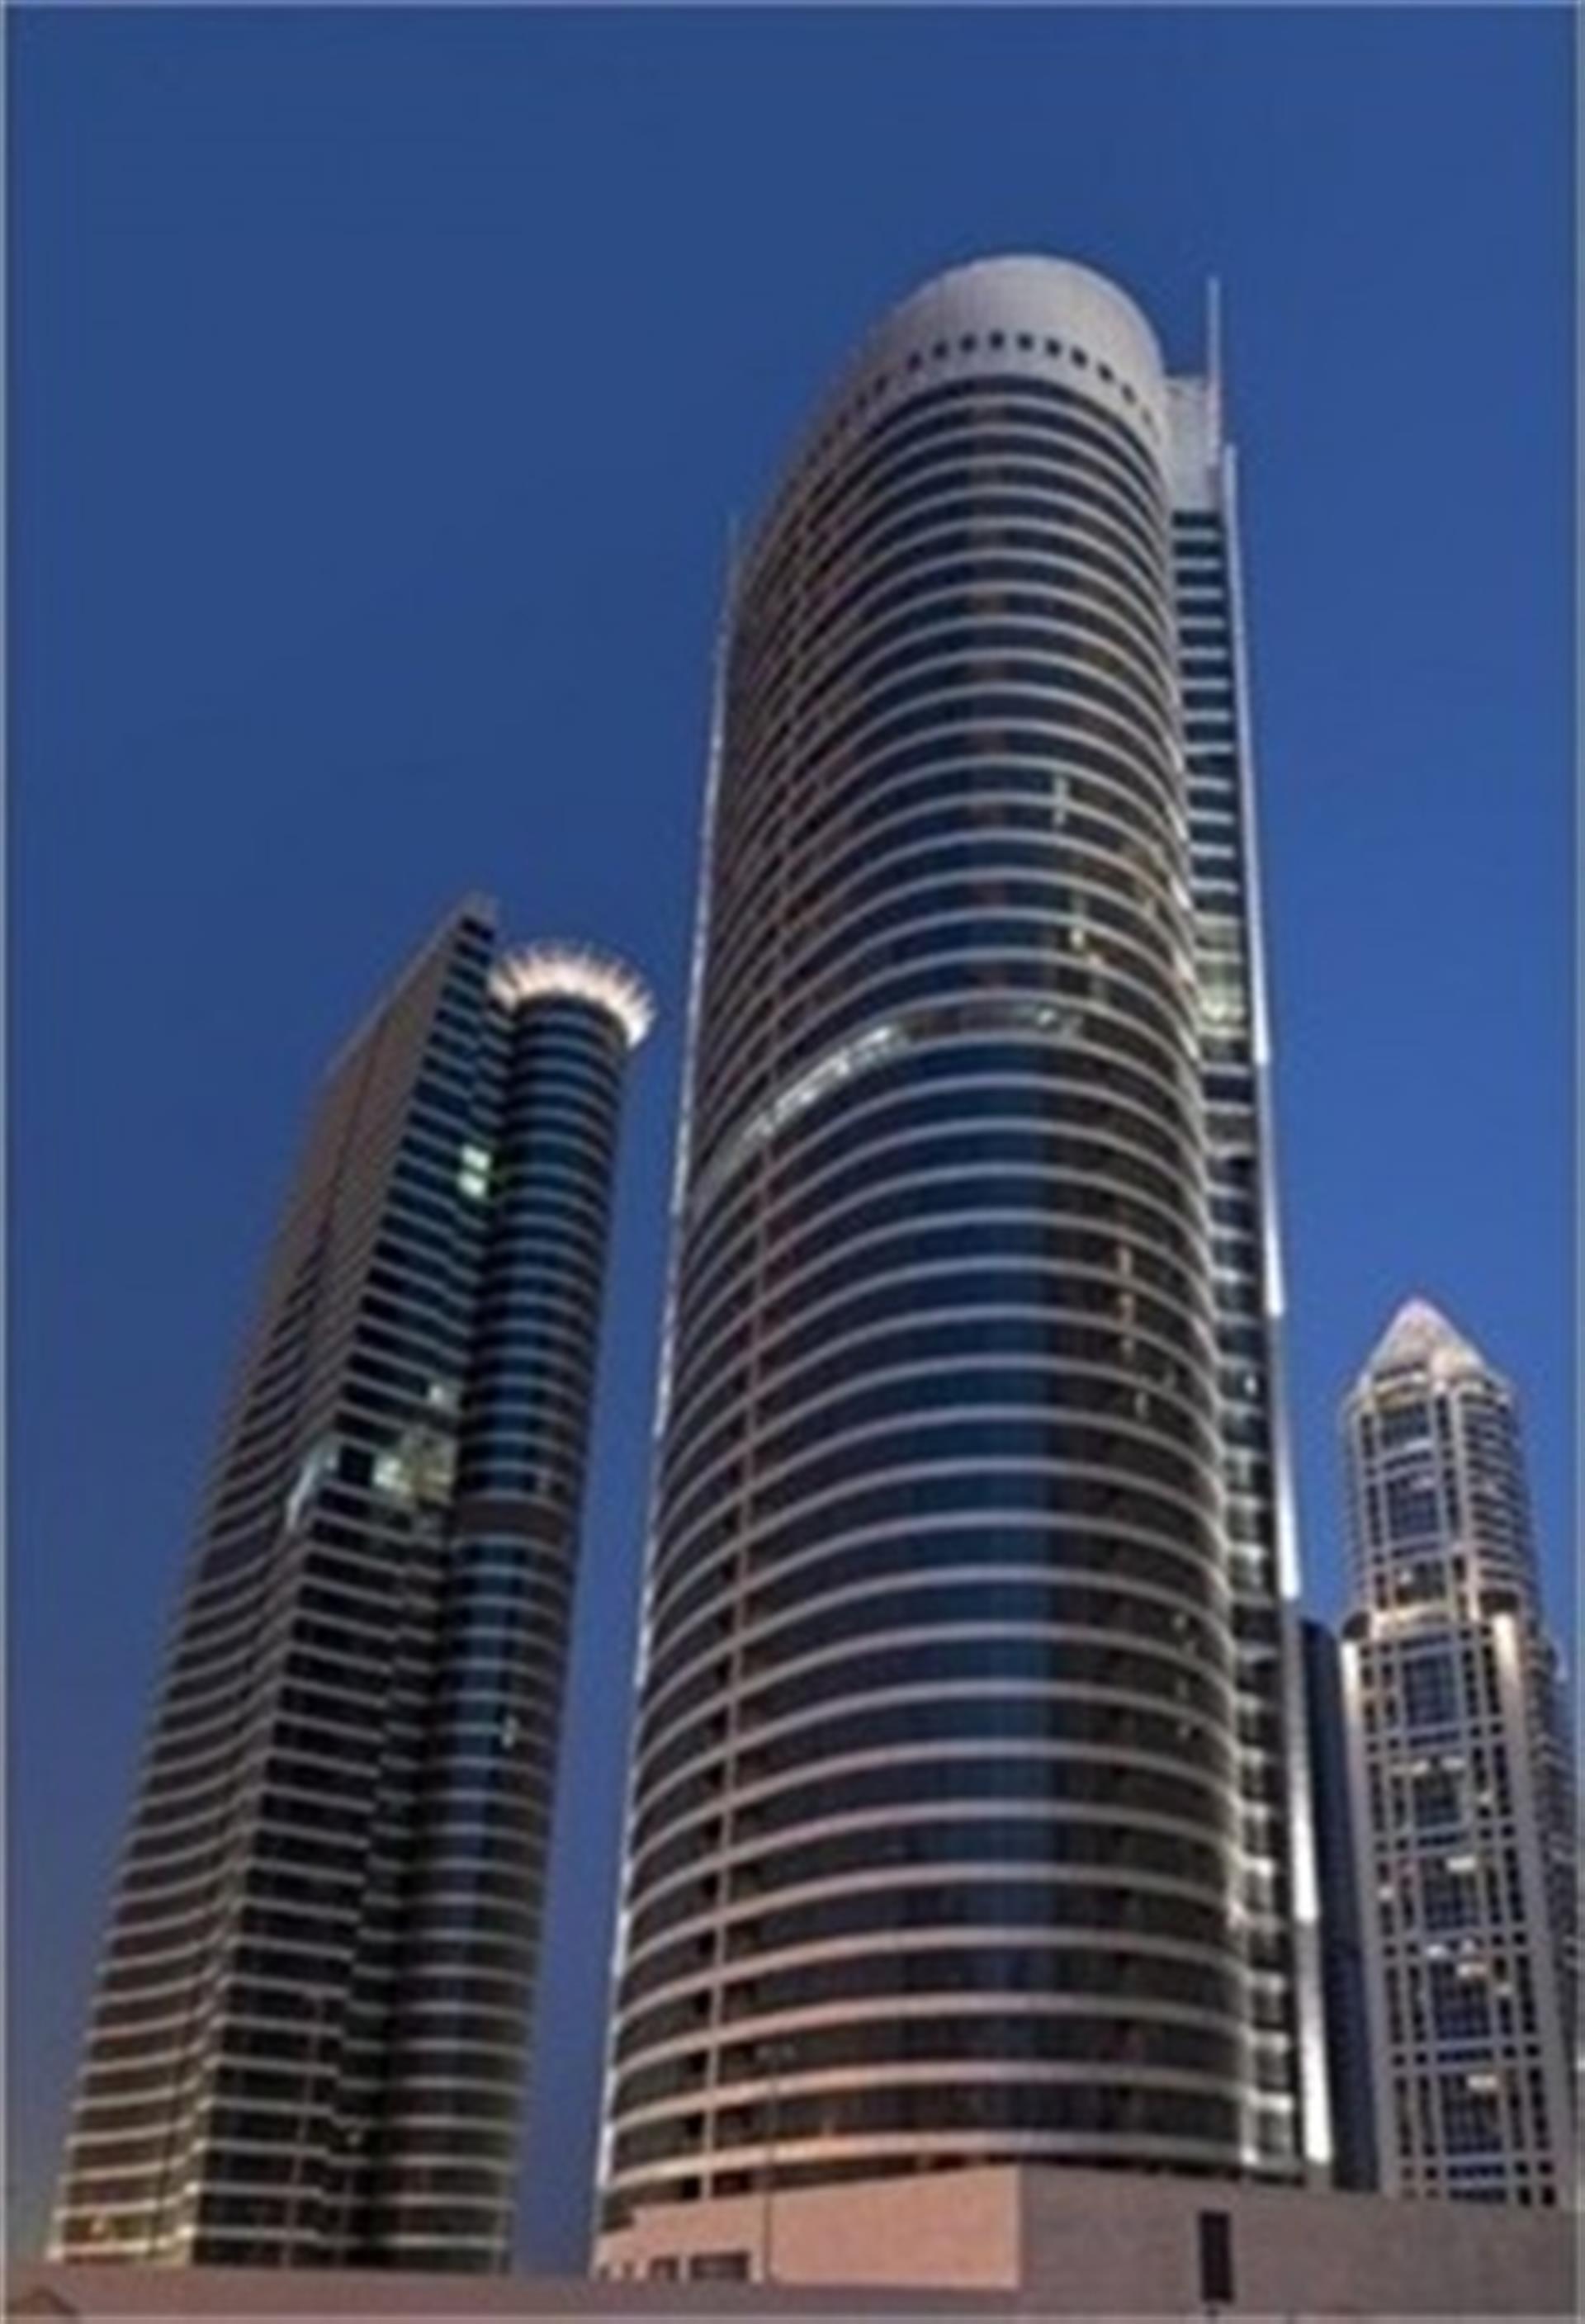 Luxurious 1 Bedroom In X1 Tower @ Jlt For Sale!